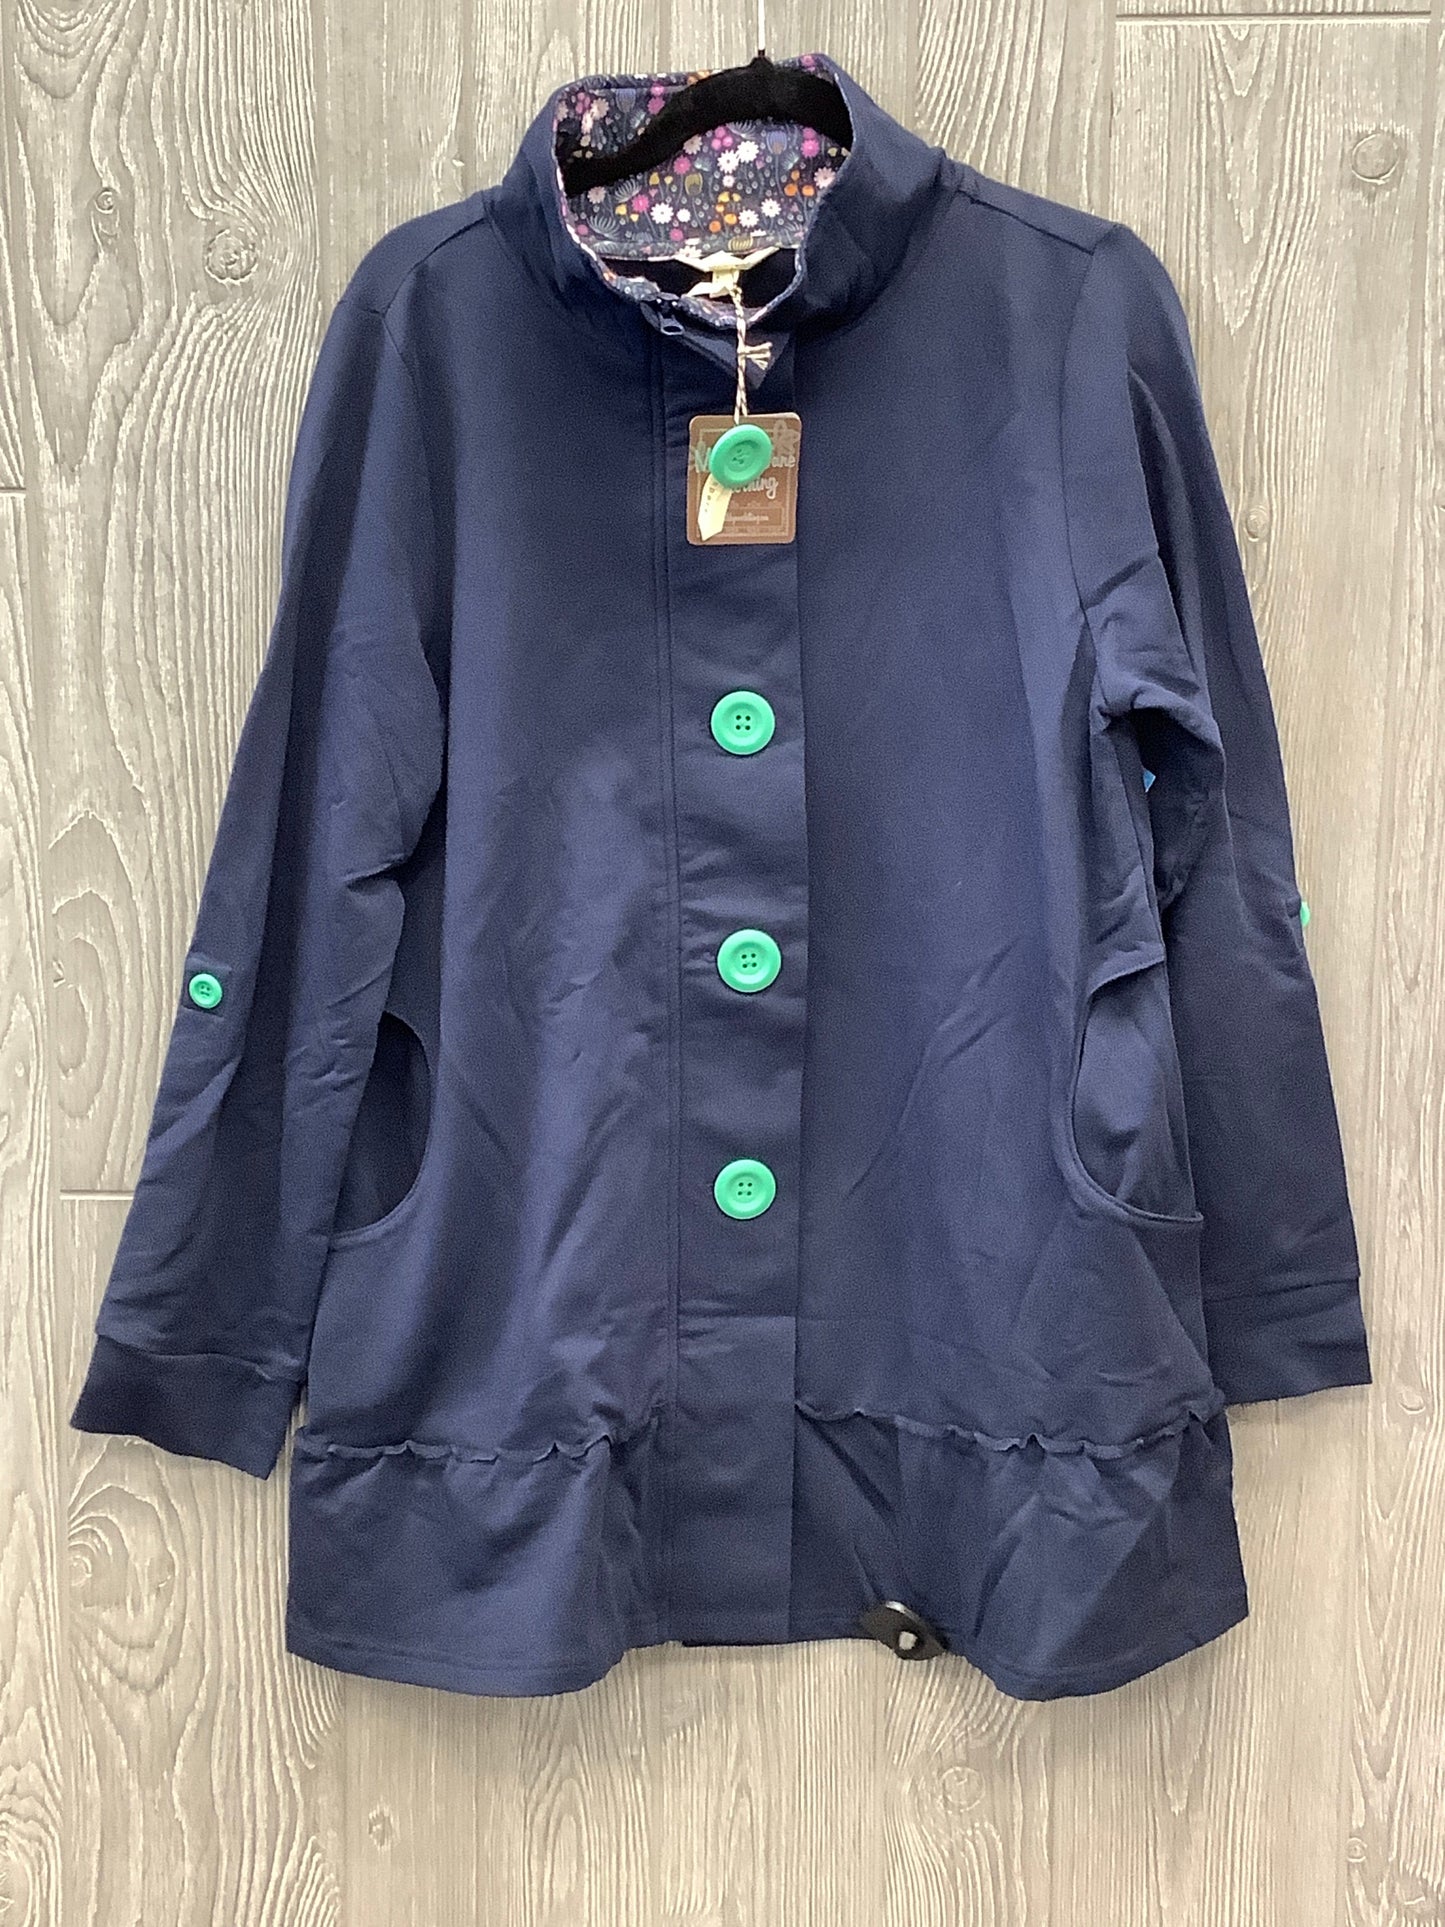 Coat Other By Matilda Jane  Size: M